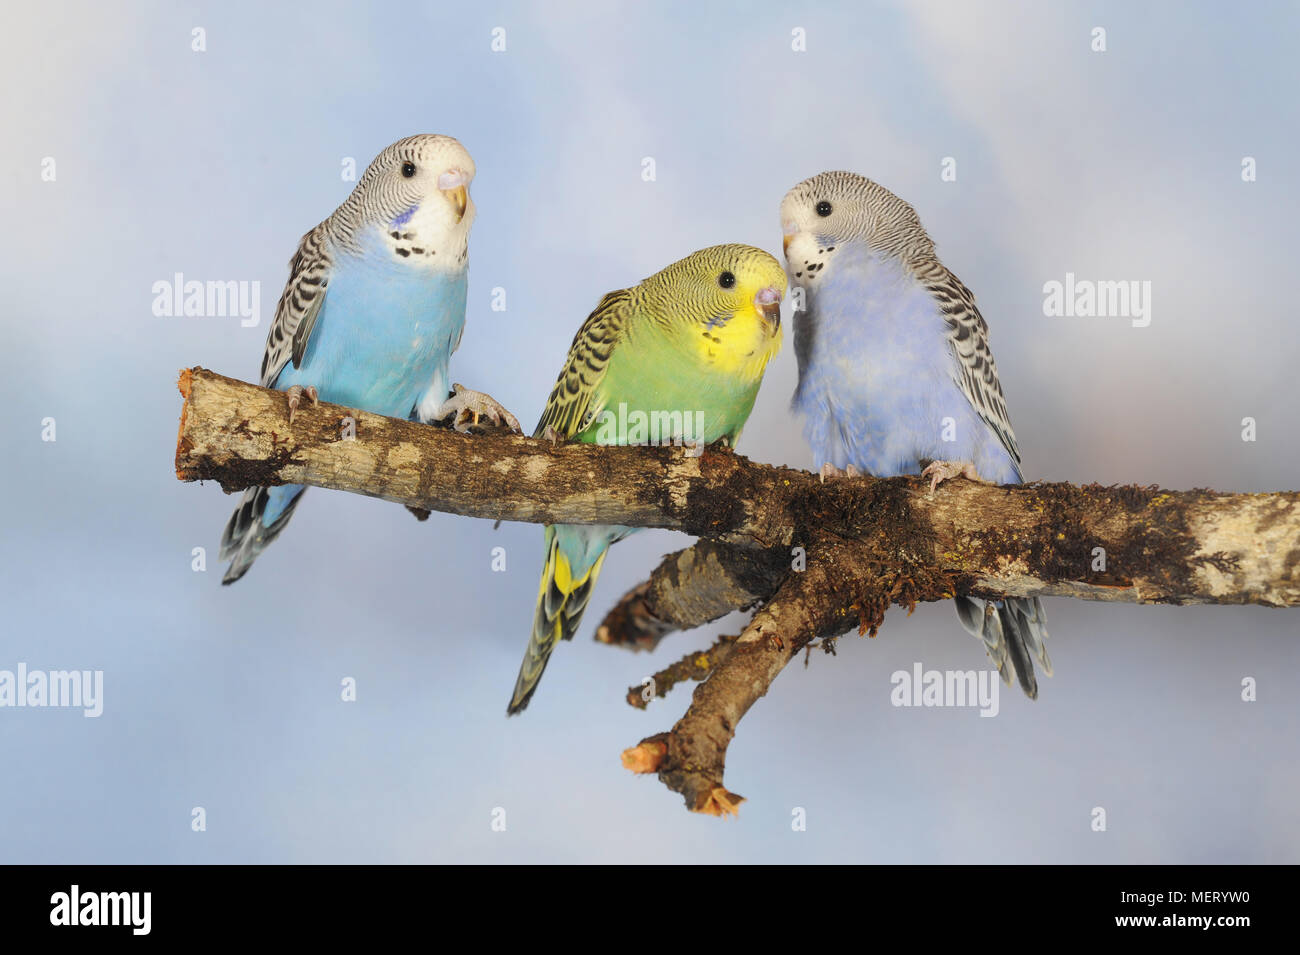 Young budgies, green-yellow and blue-white, sitting on branch Stock Photo